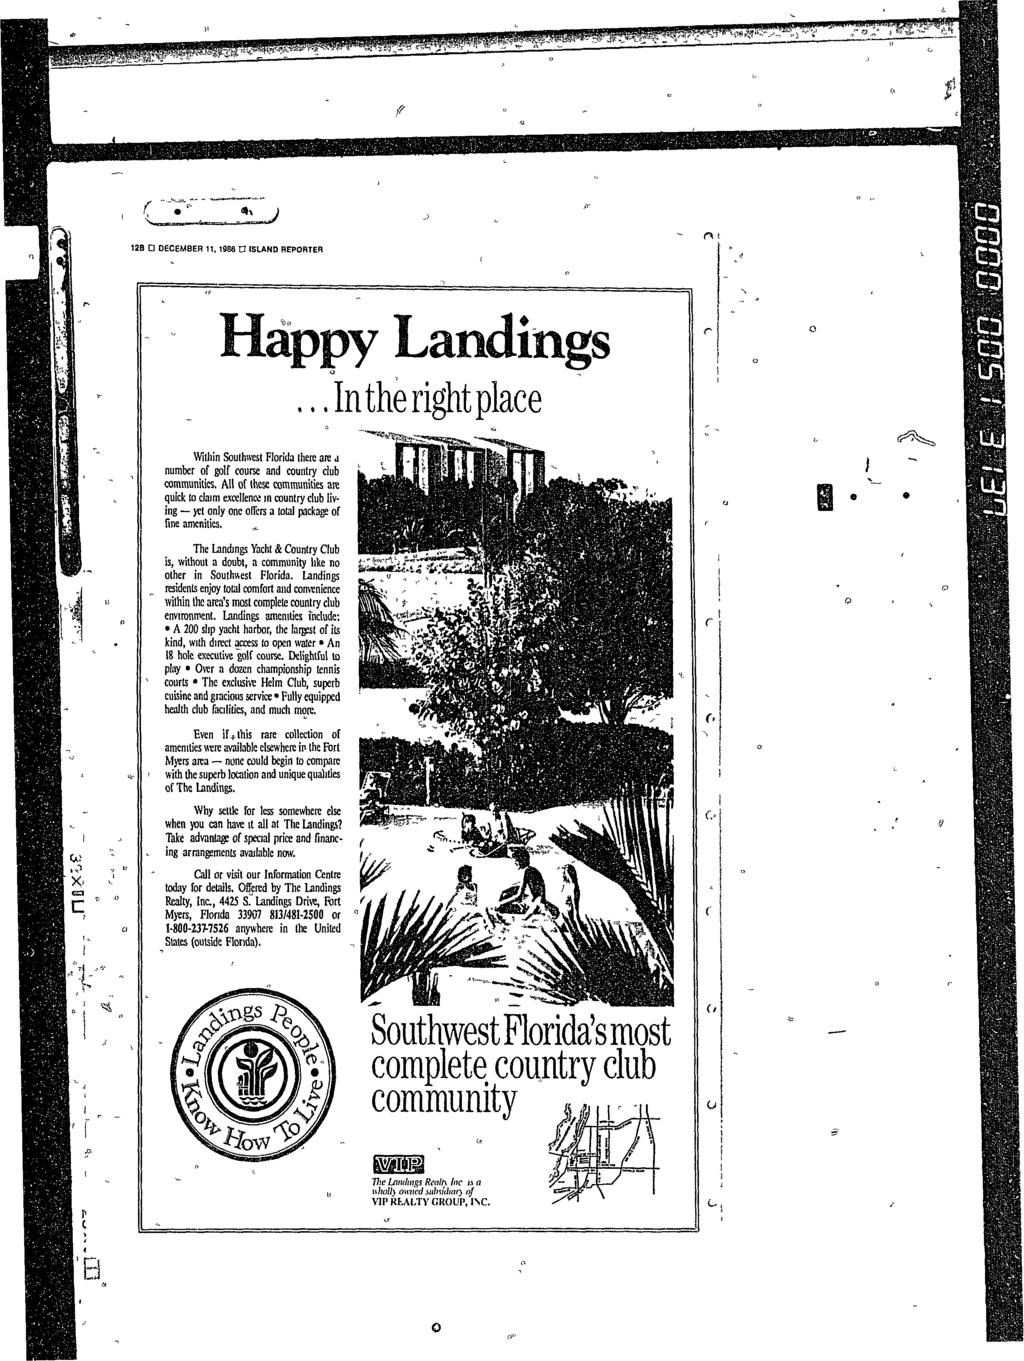 " a 1' i SJ -S-i'- /? ( > " J 12B D DECEMBER 11,1986 tj ISLAND REPORTER Happy Landings...In the right place Witliin Southwest Florida there are a number of golf course and country ciub communities.